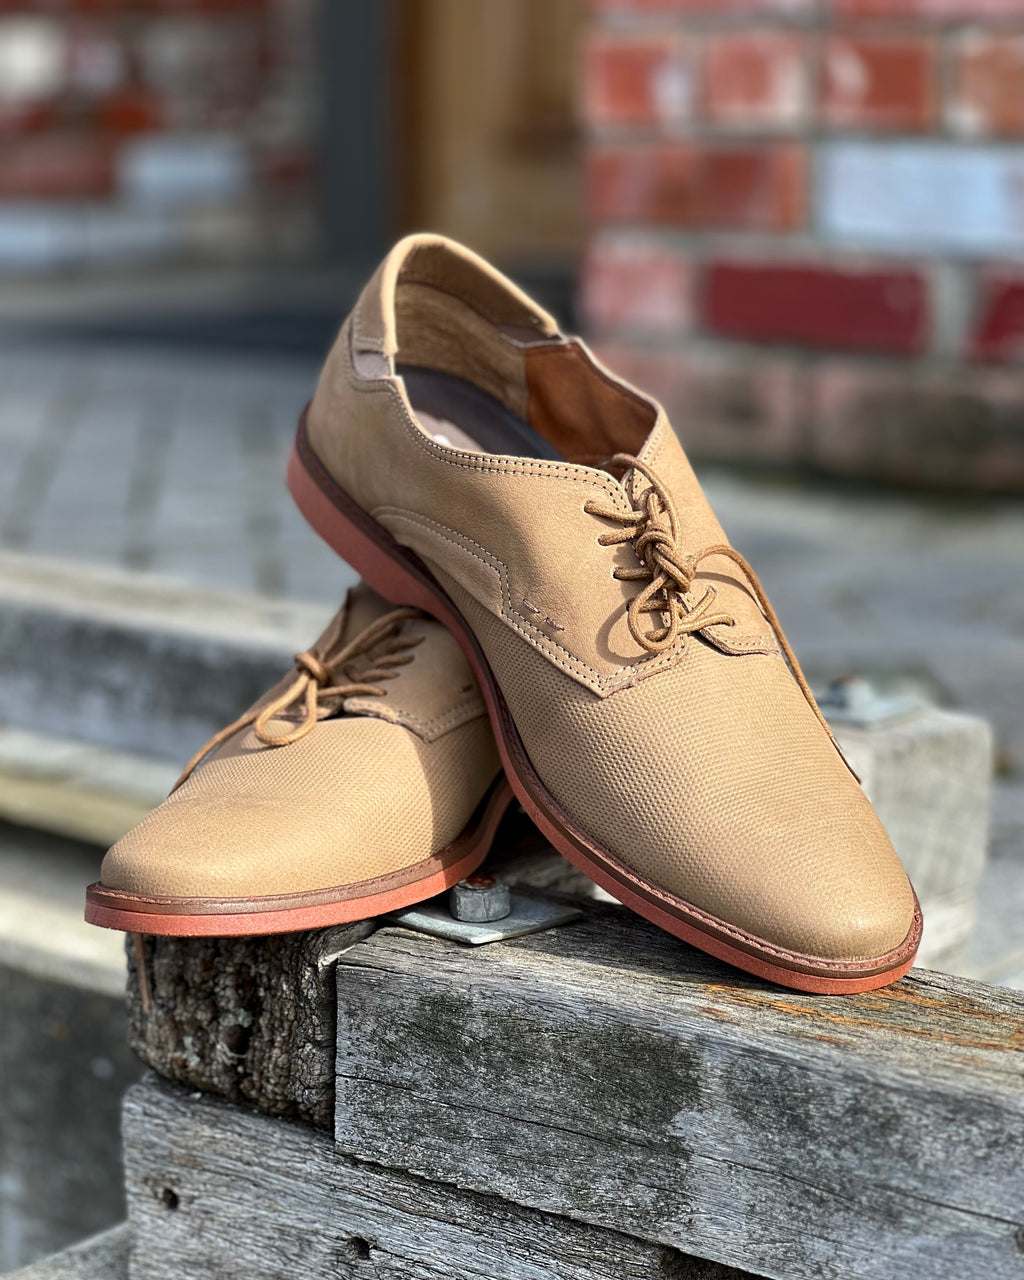 Comfortable men's leather shoes by Kildare